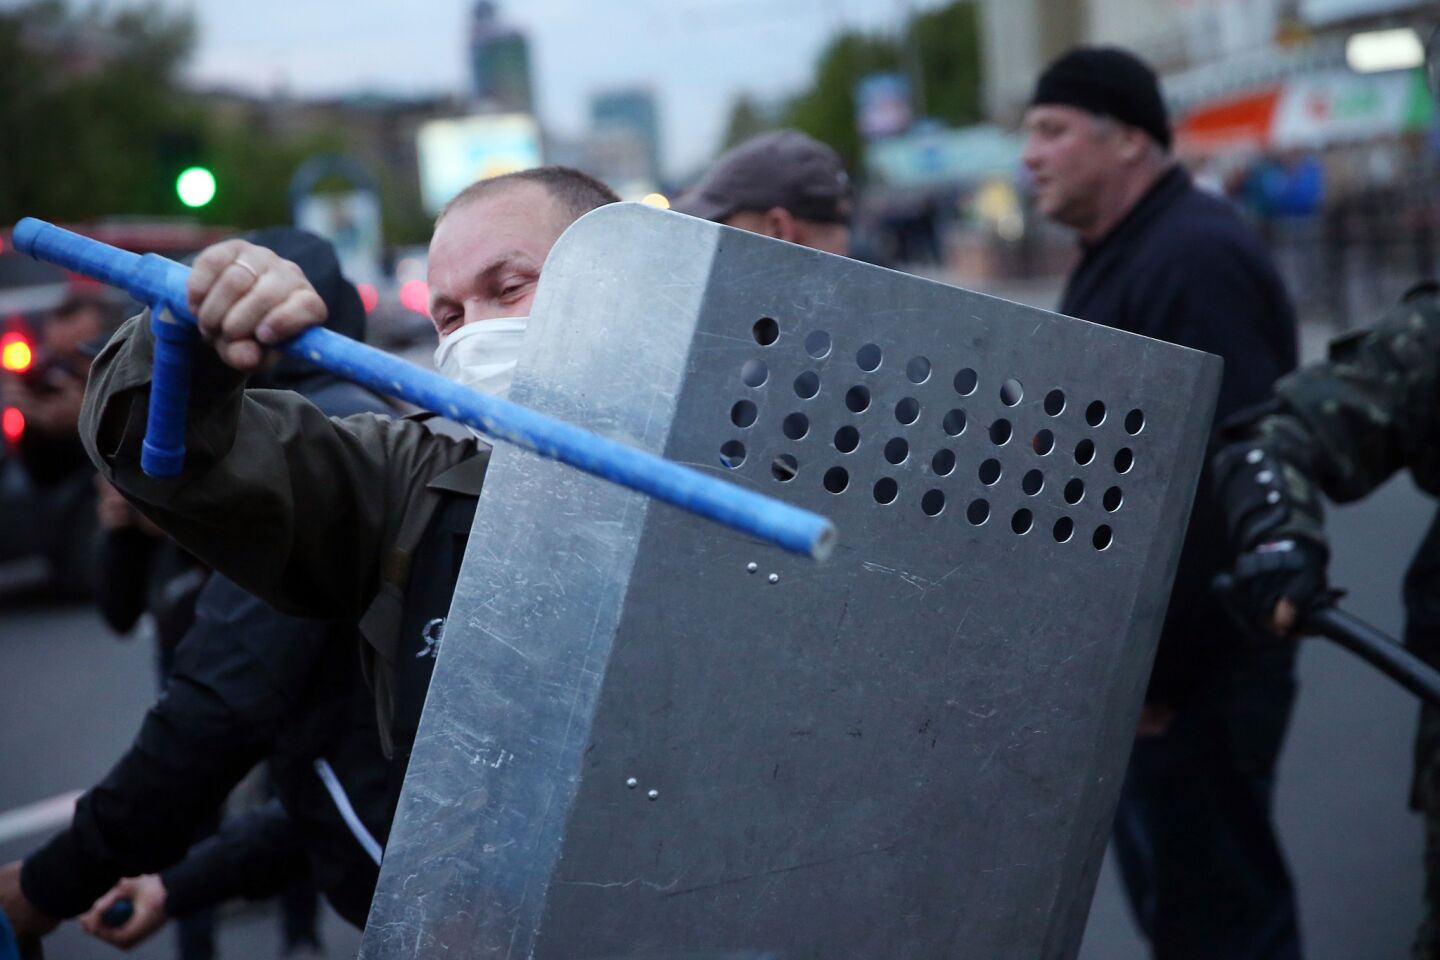 A pro-Russian activist beats his shield as the activists regroup after clashing with pro-government supporters during a rally and march in Donetsk, Ukraine.